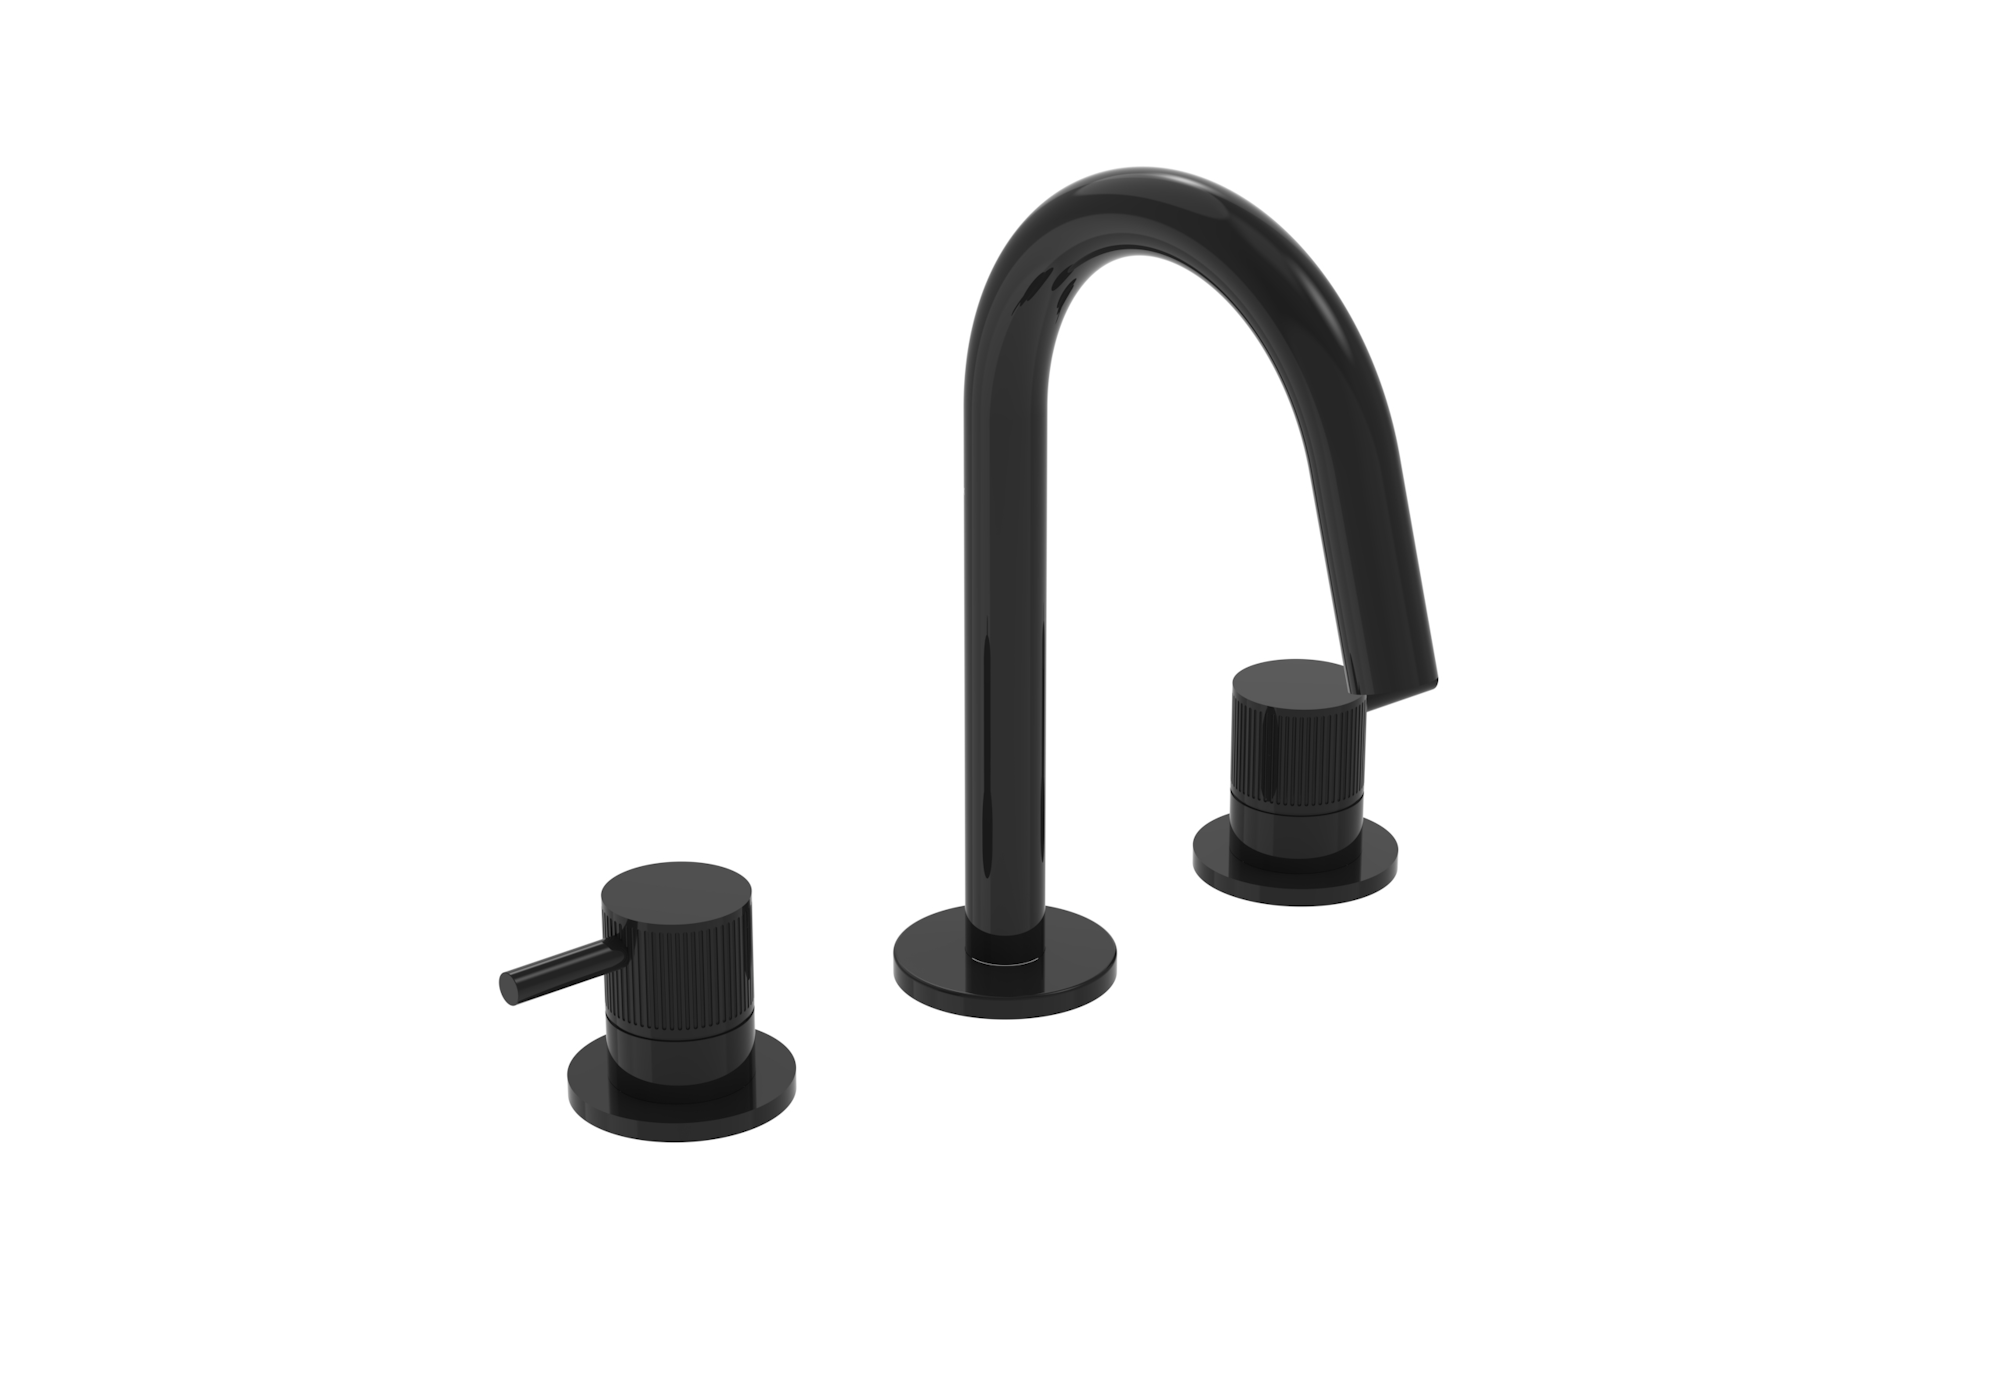 COS 3 Tap Hole Deck mounted KIT - w/ Fluted handle - Satin Black (PVD)